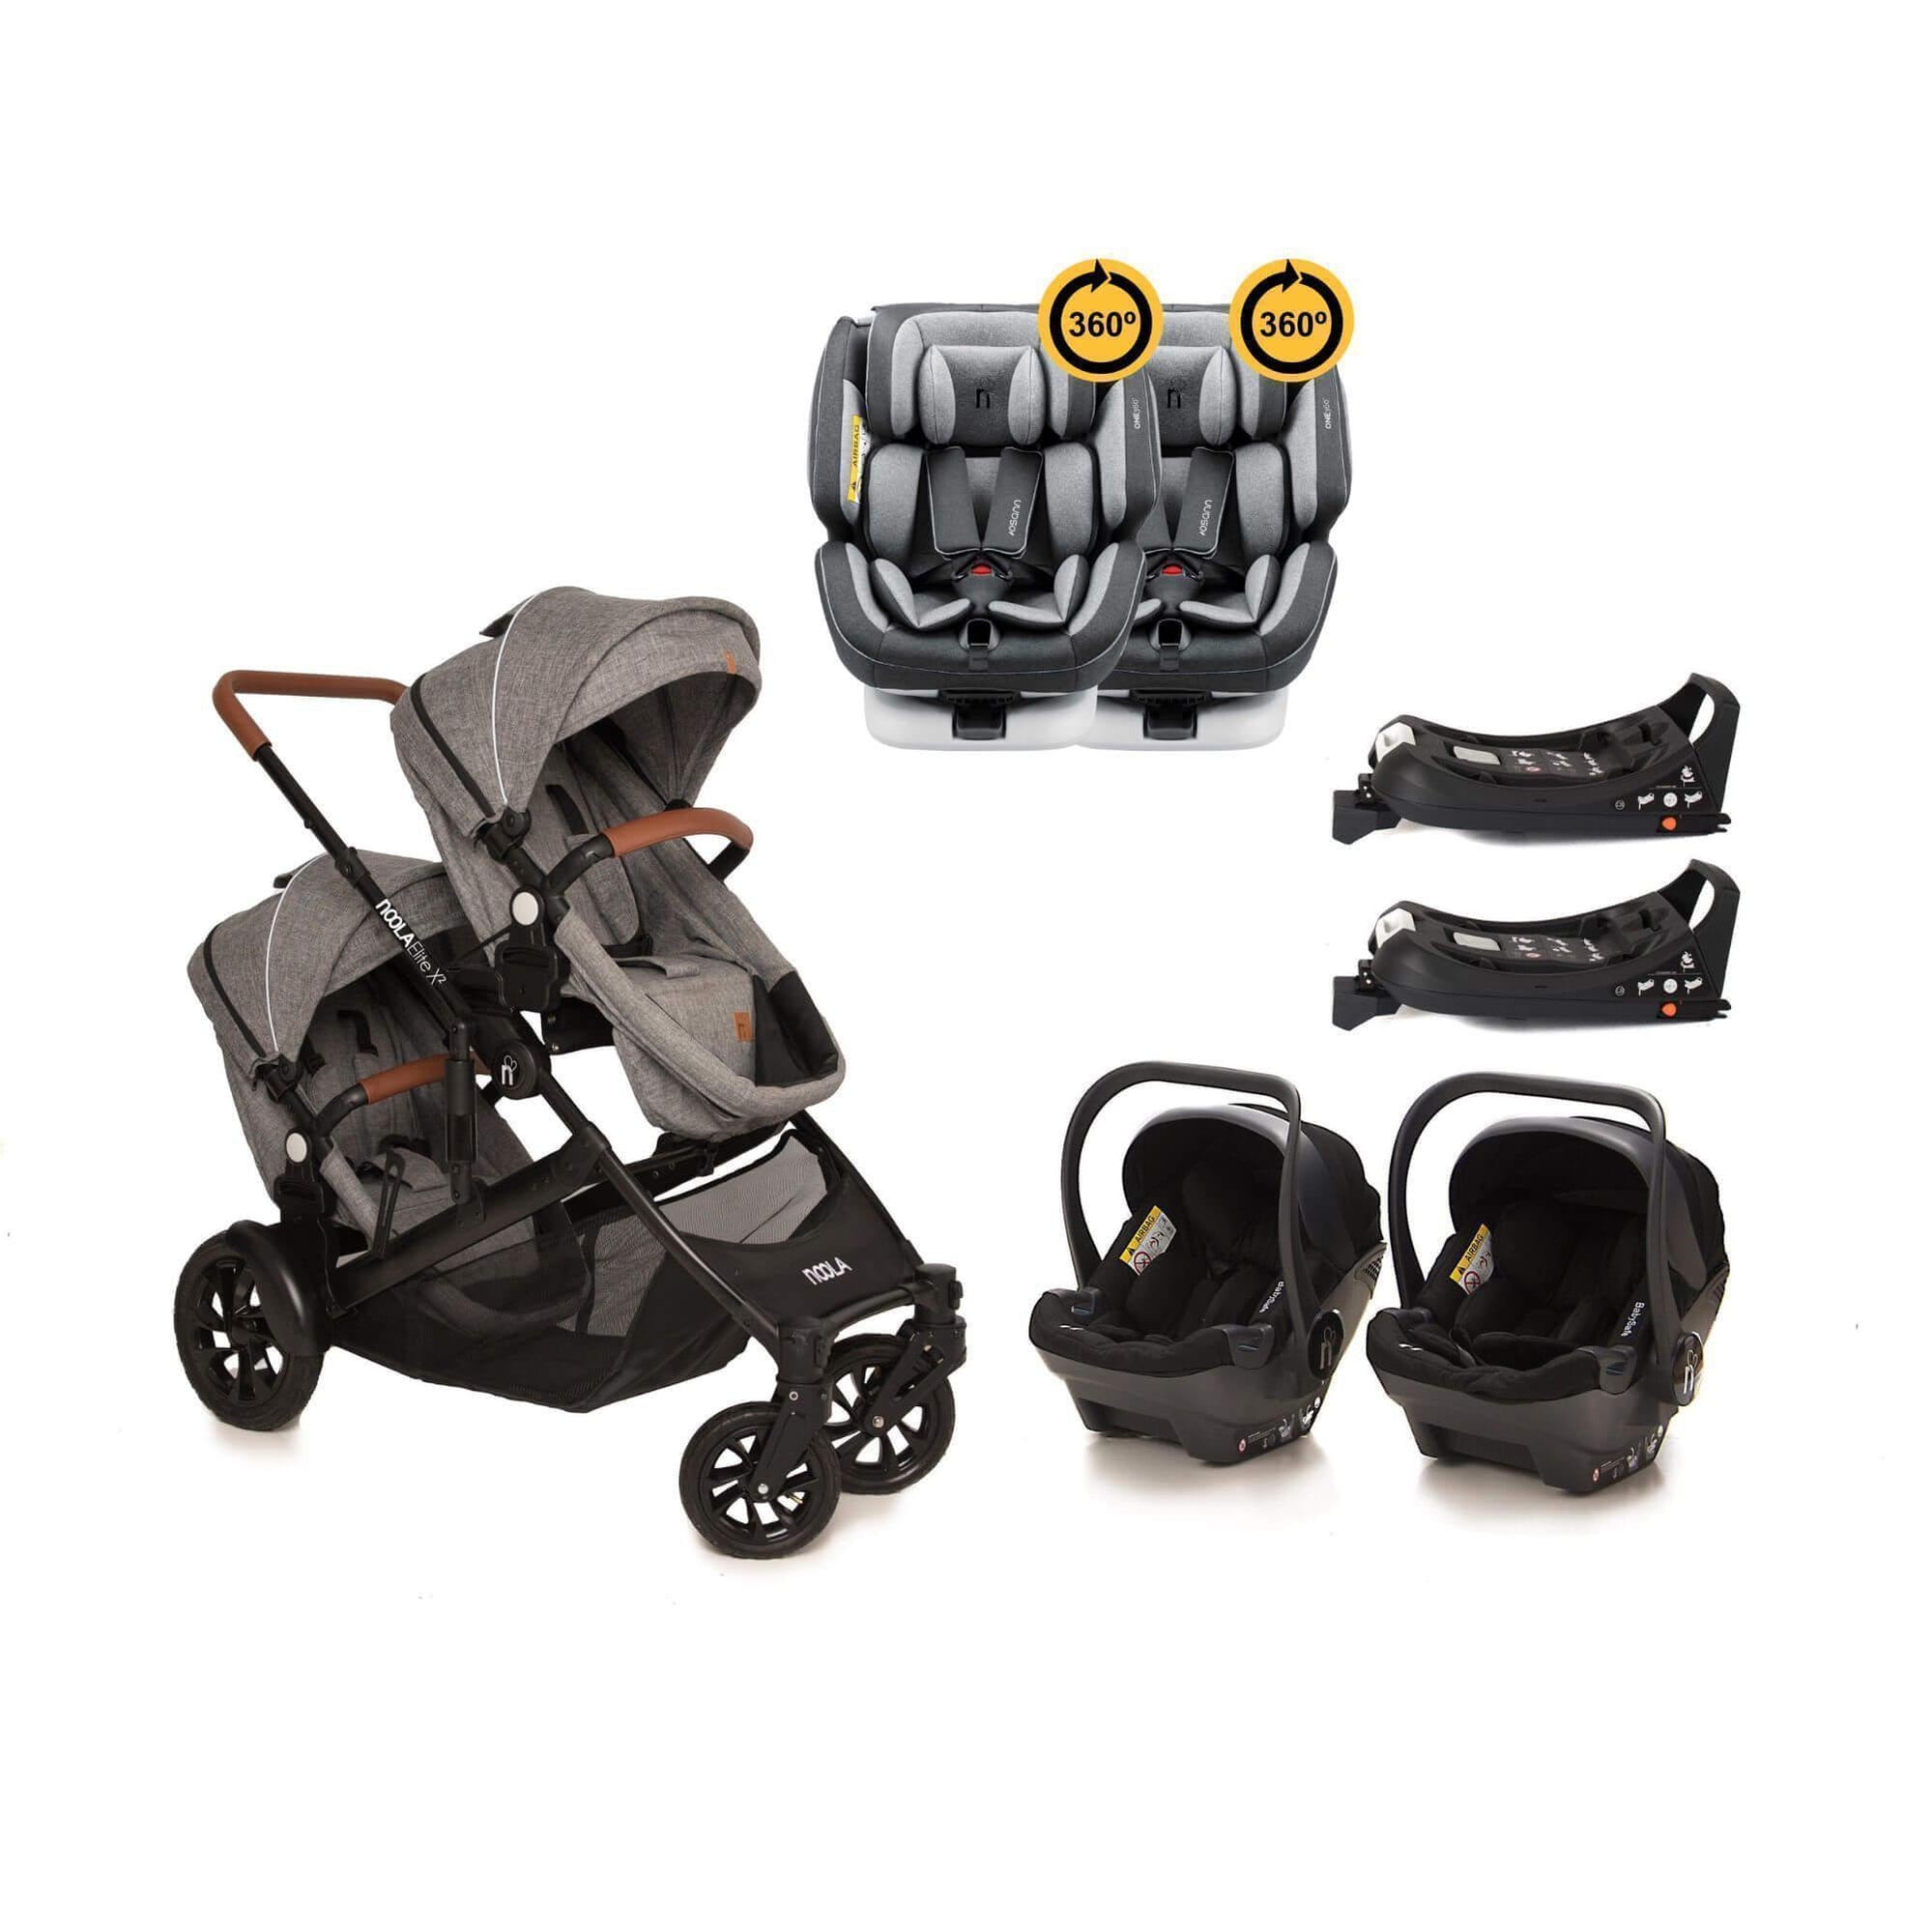 noola elitex2 twin travel system baby stroller grey #SELECT THE COLOUR OF YOUR 2X ONE360_ONE360 | LUNAR GREY